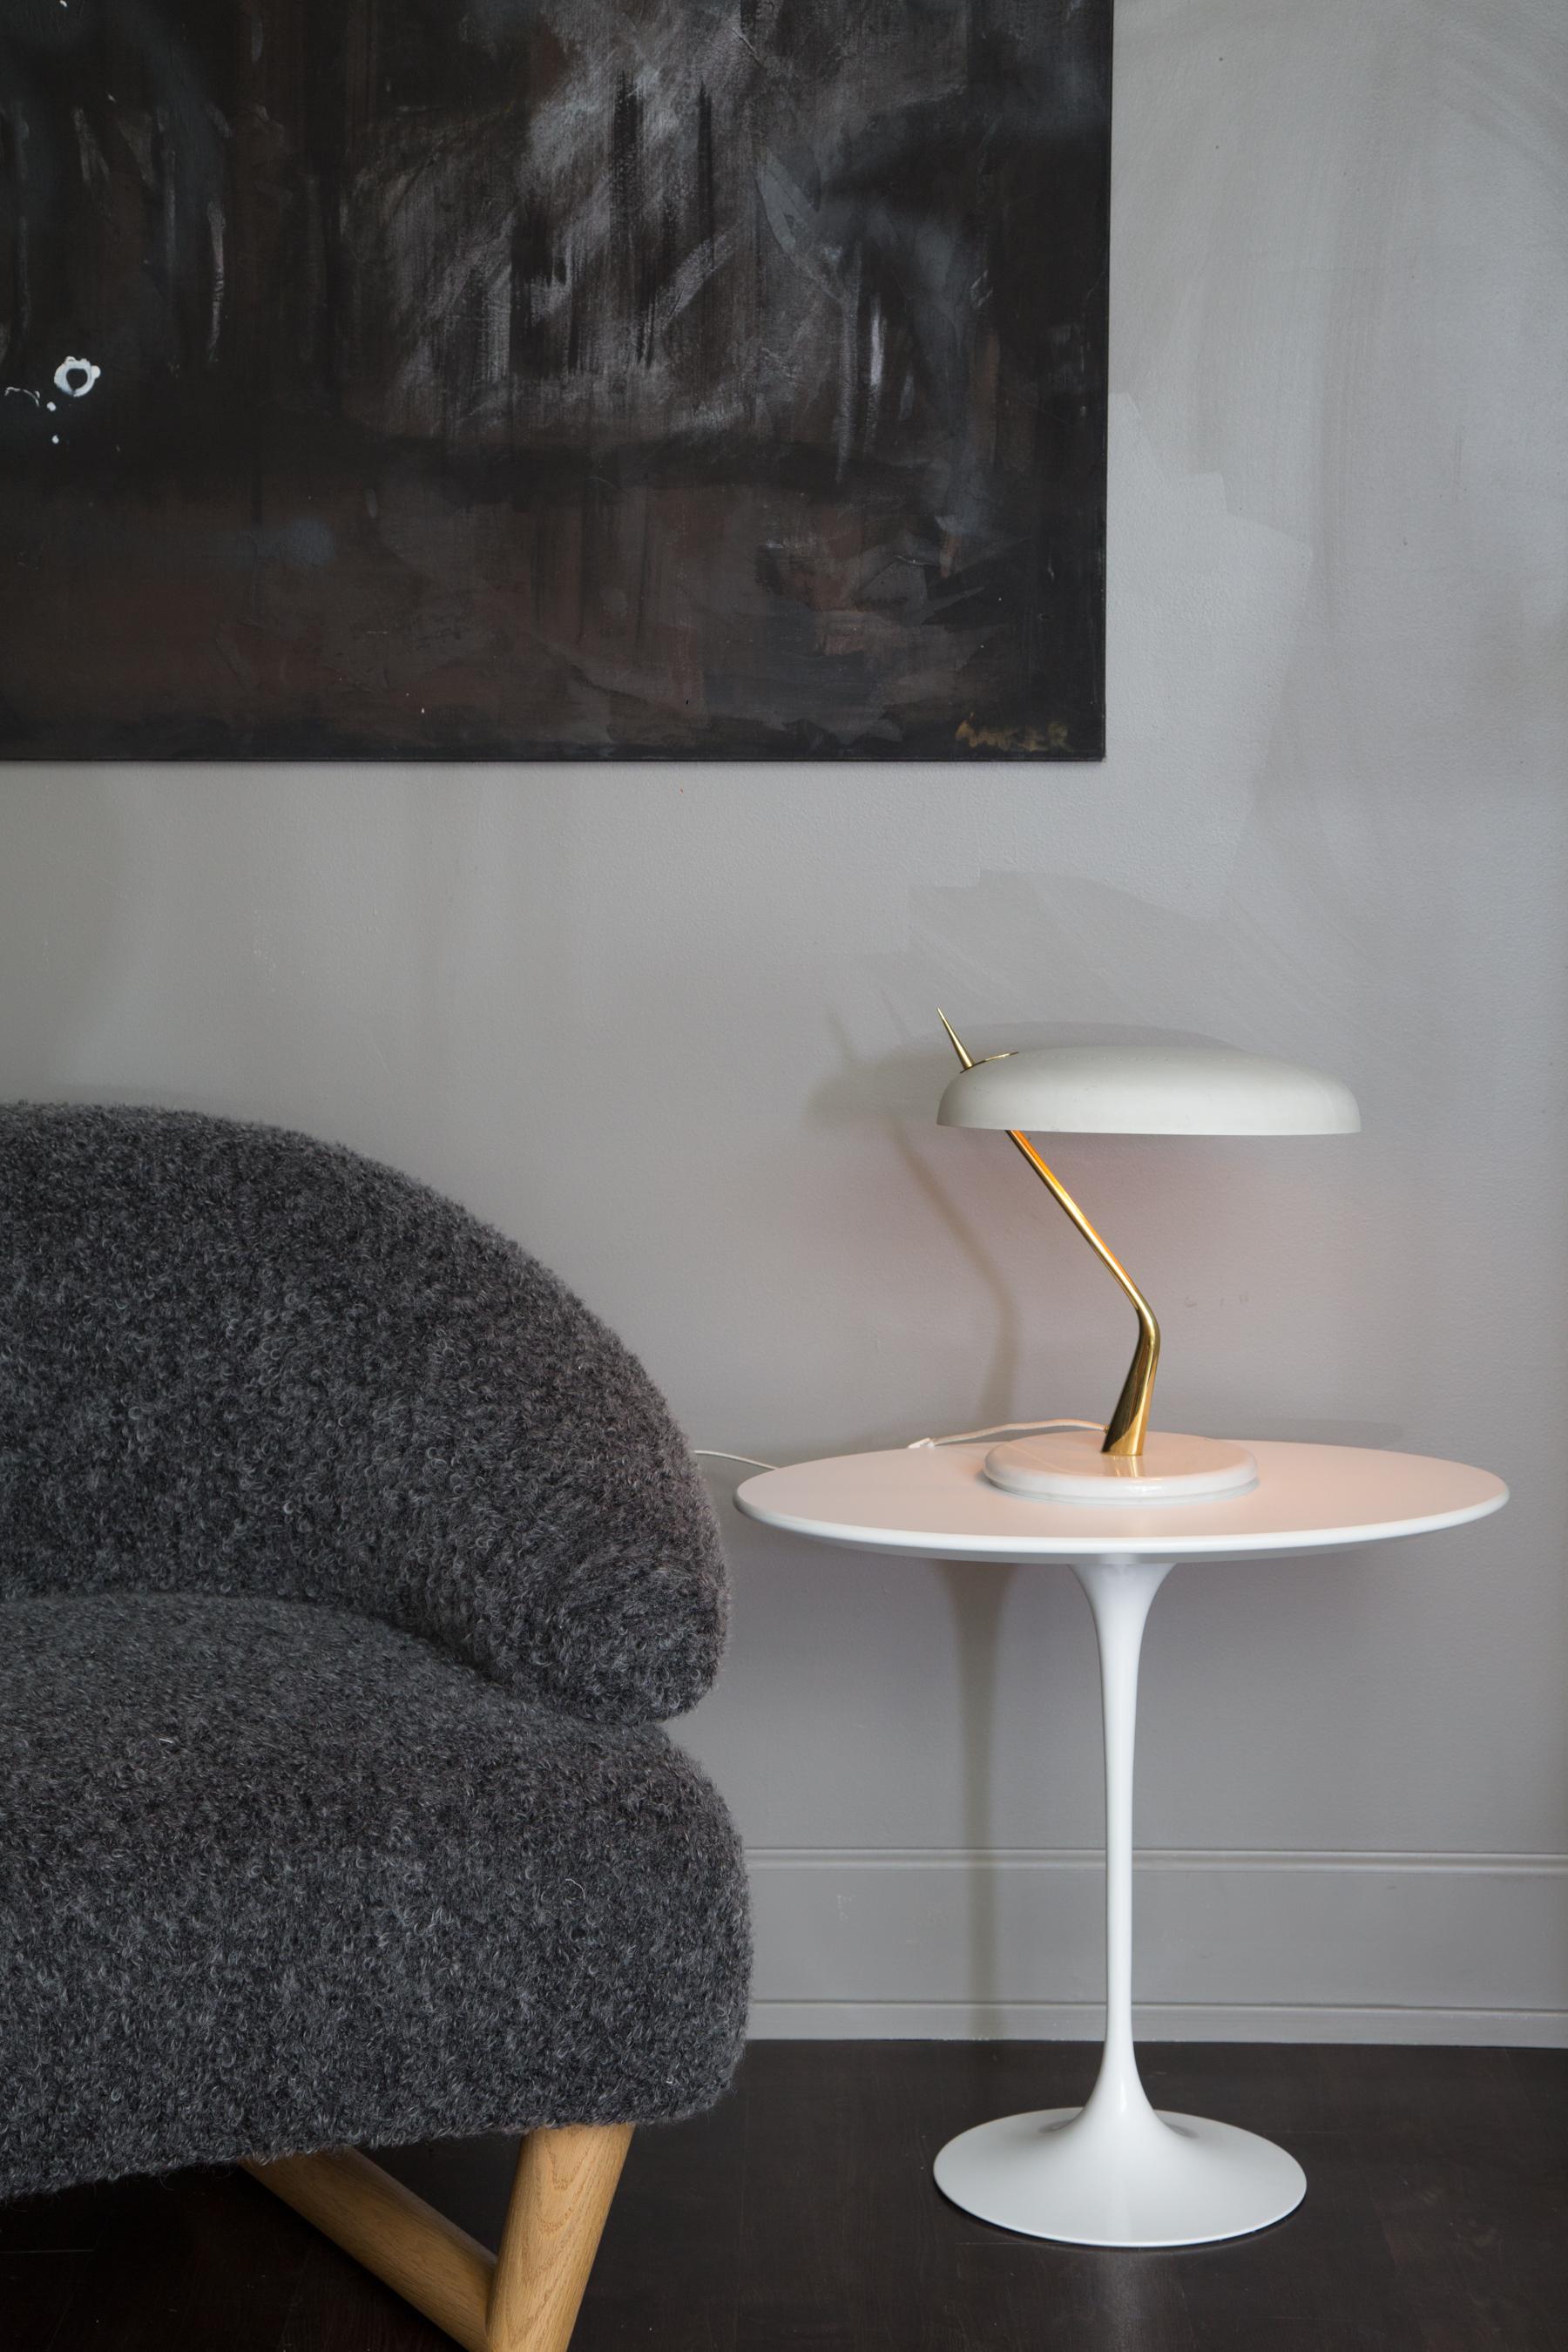 1950s Oscar Torlasco marble and metal table lamp for Lumen milano. An exceptionally refined and sculptural design executed in marble, brass and original painted metal.

Lumen Milano was one of the most innovative lighting design companies in Italy